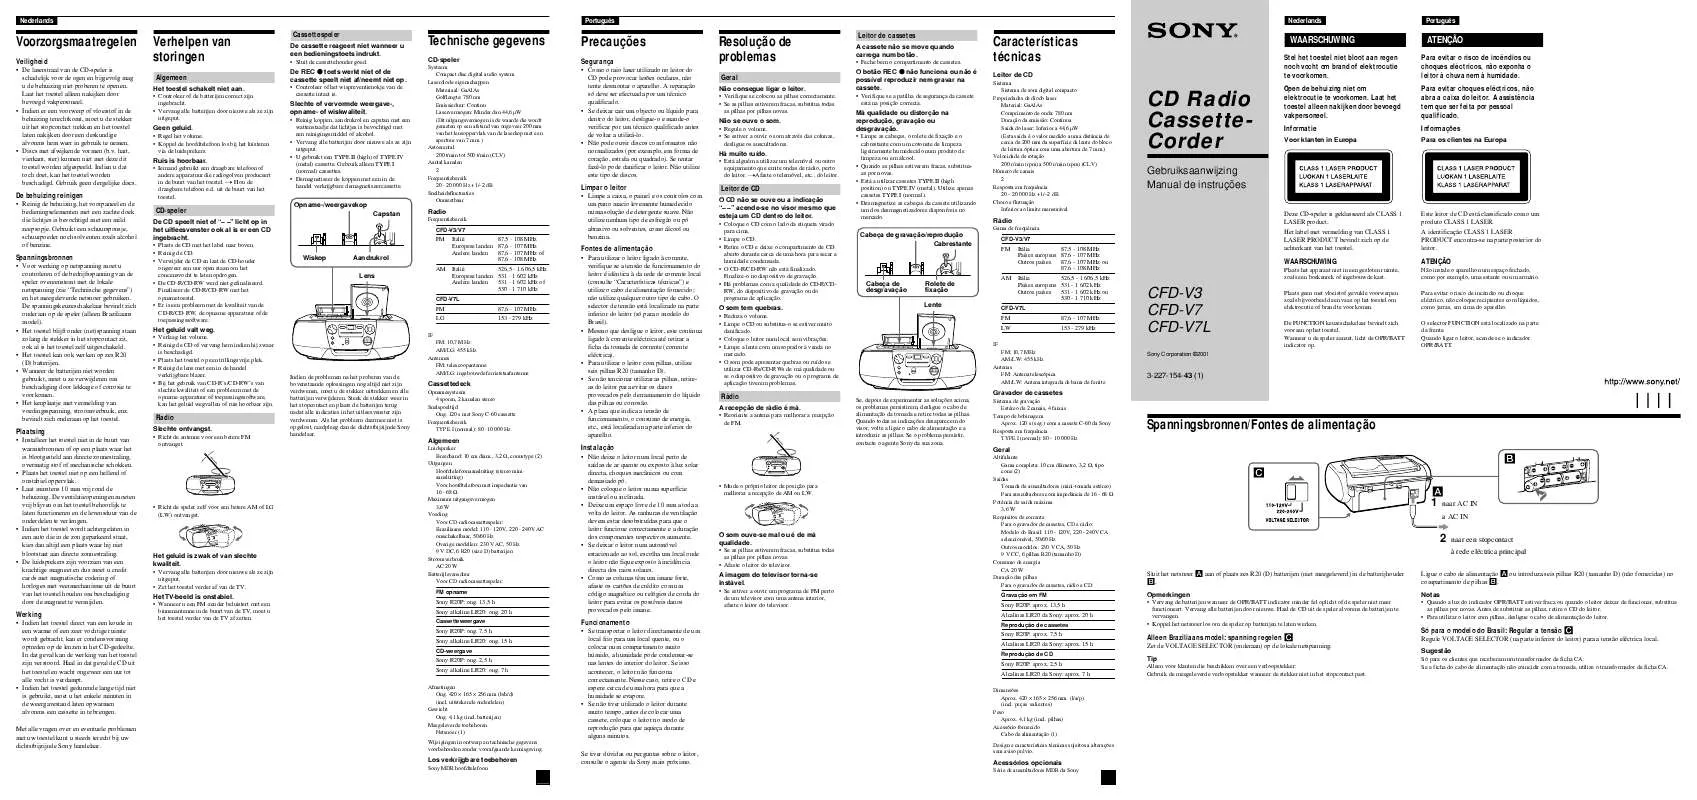 Mode d'emploi SONY CFD-V7